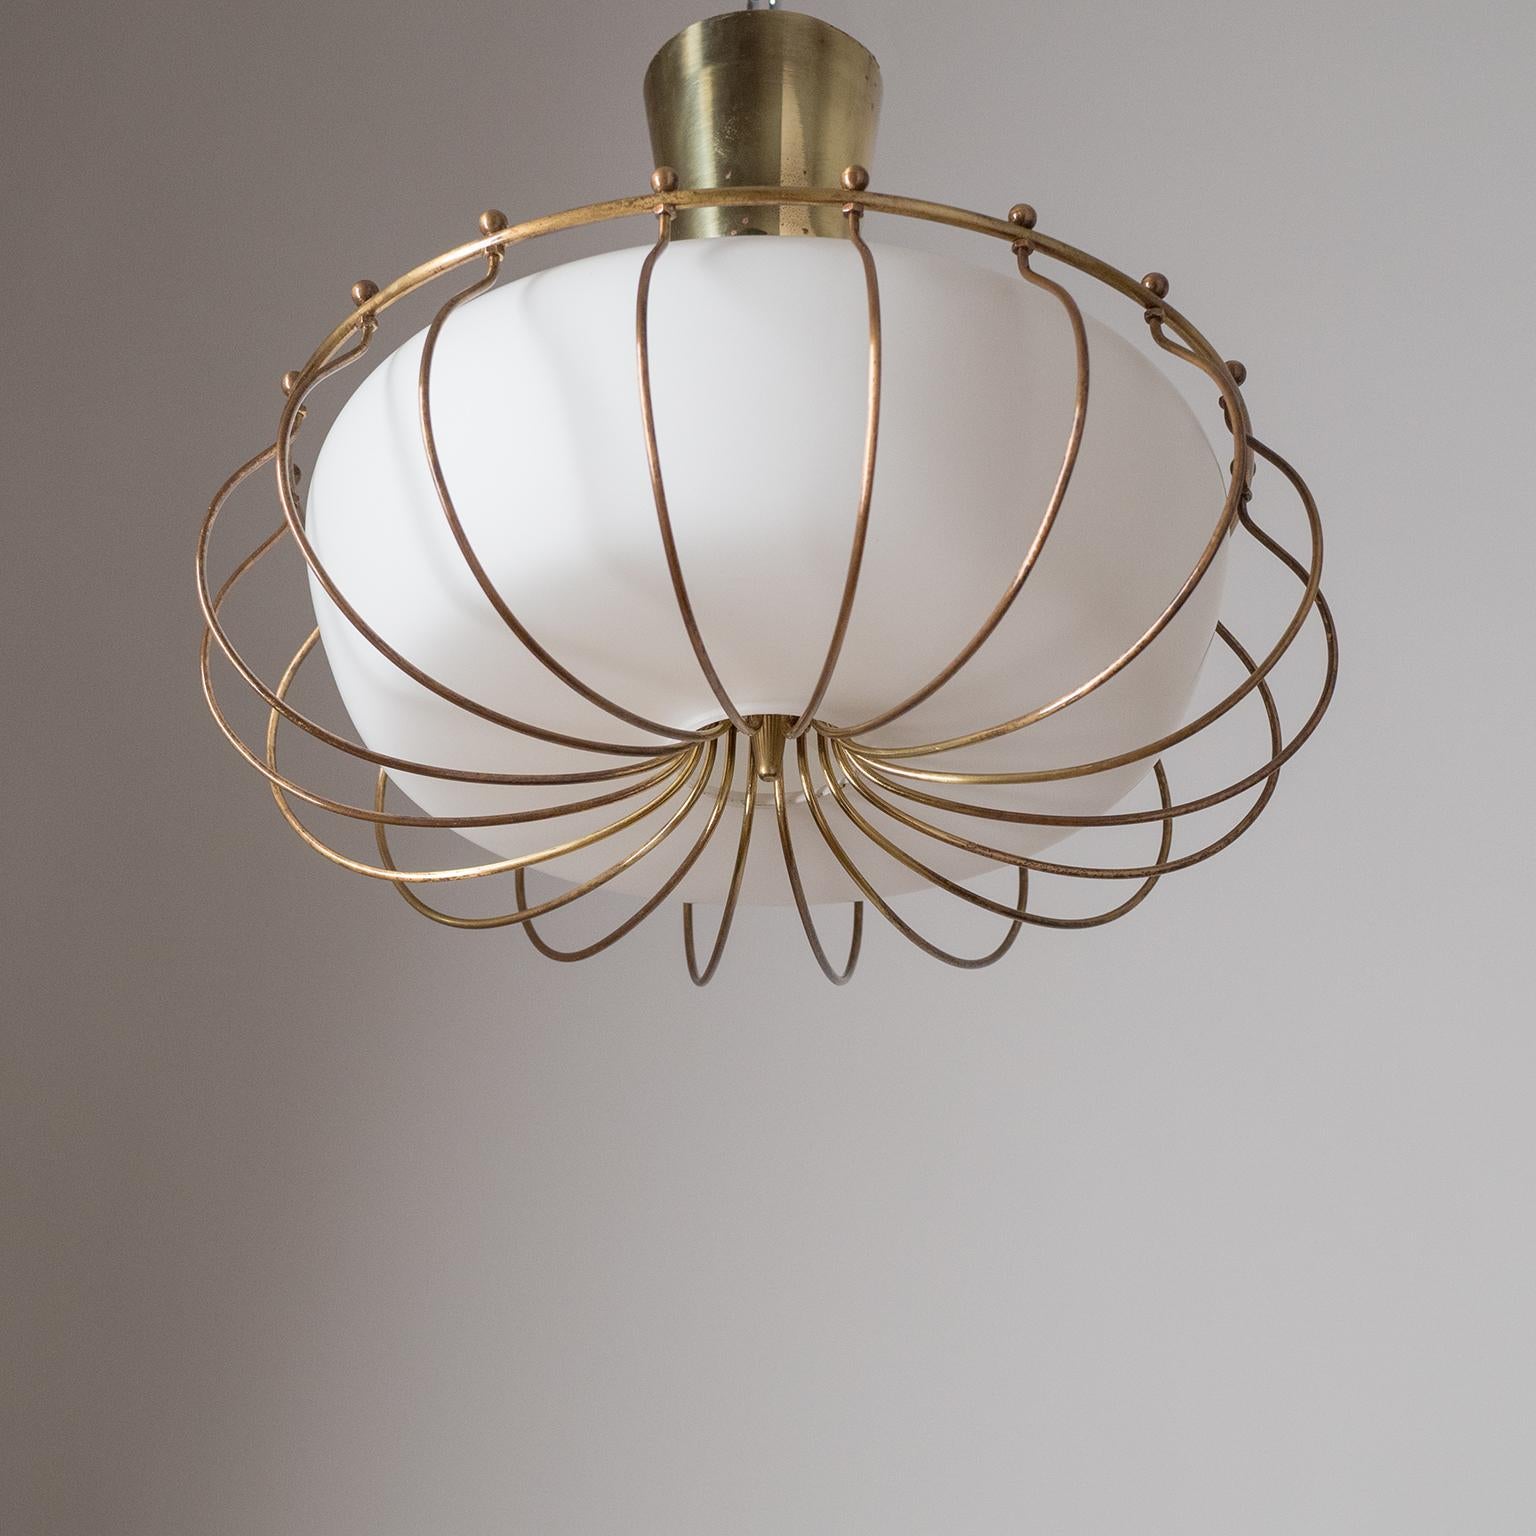 Ceiling Light, 1940s, Brass and Satin Glass 6